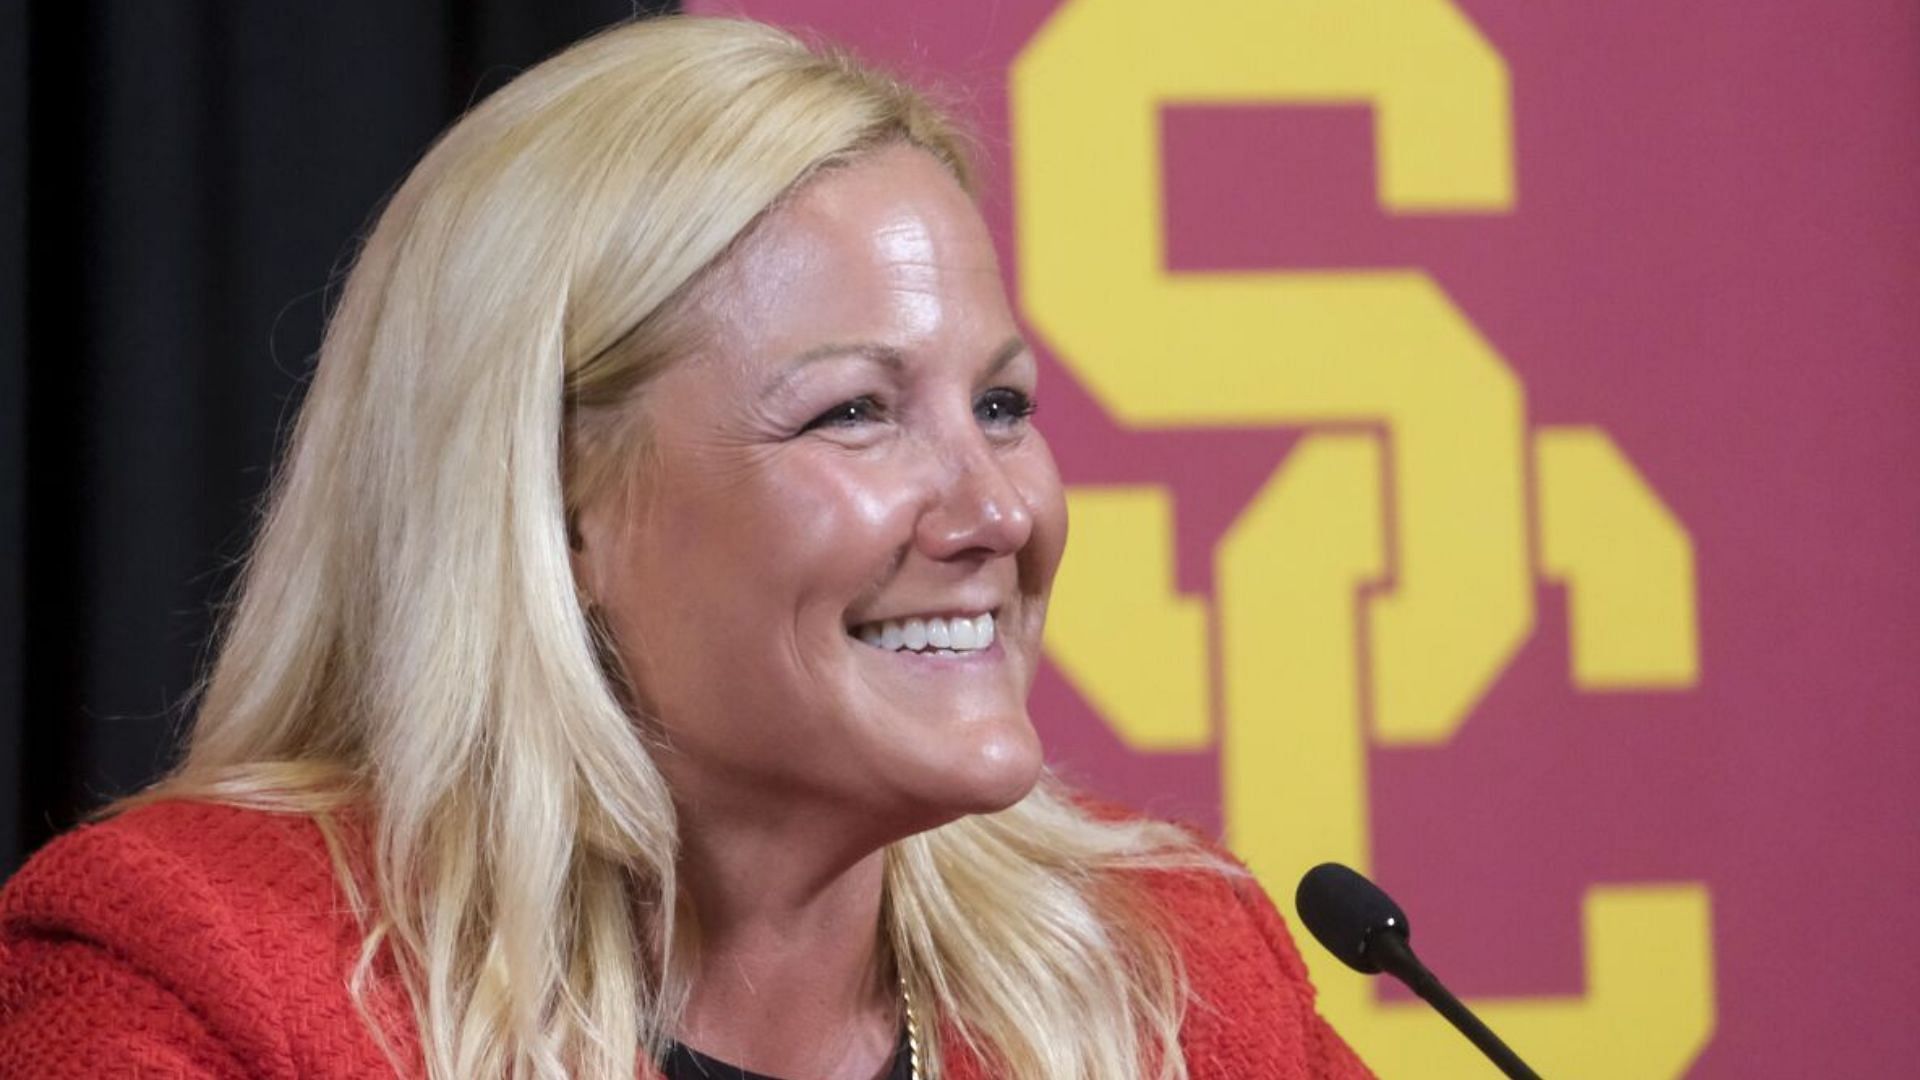 Jennifer Cohen has been named the new AD for the USC Trojans